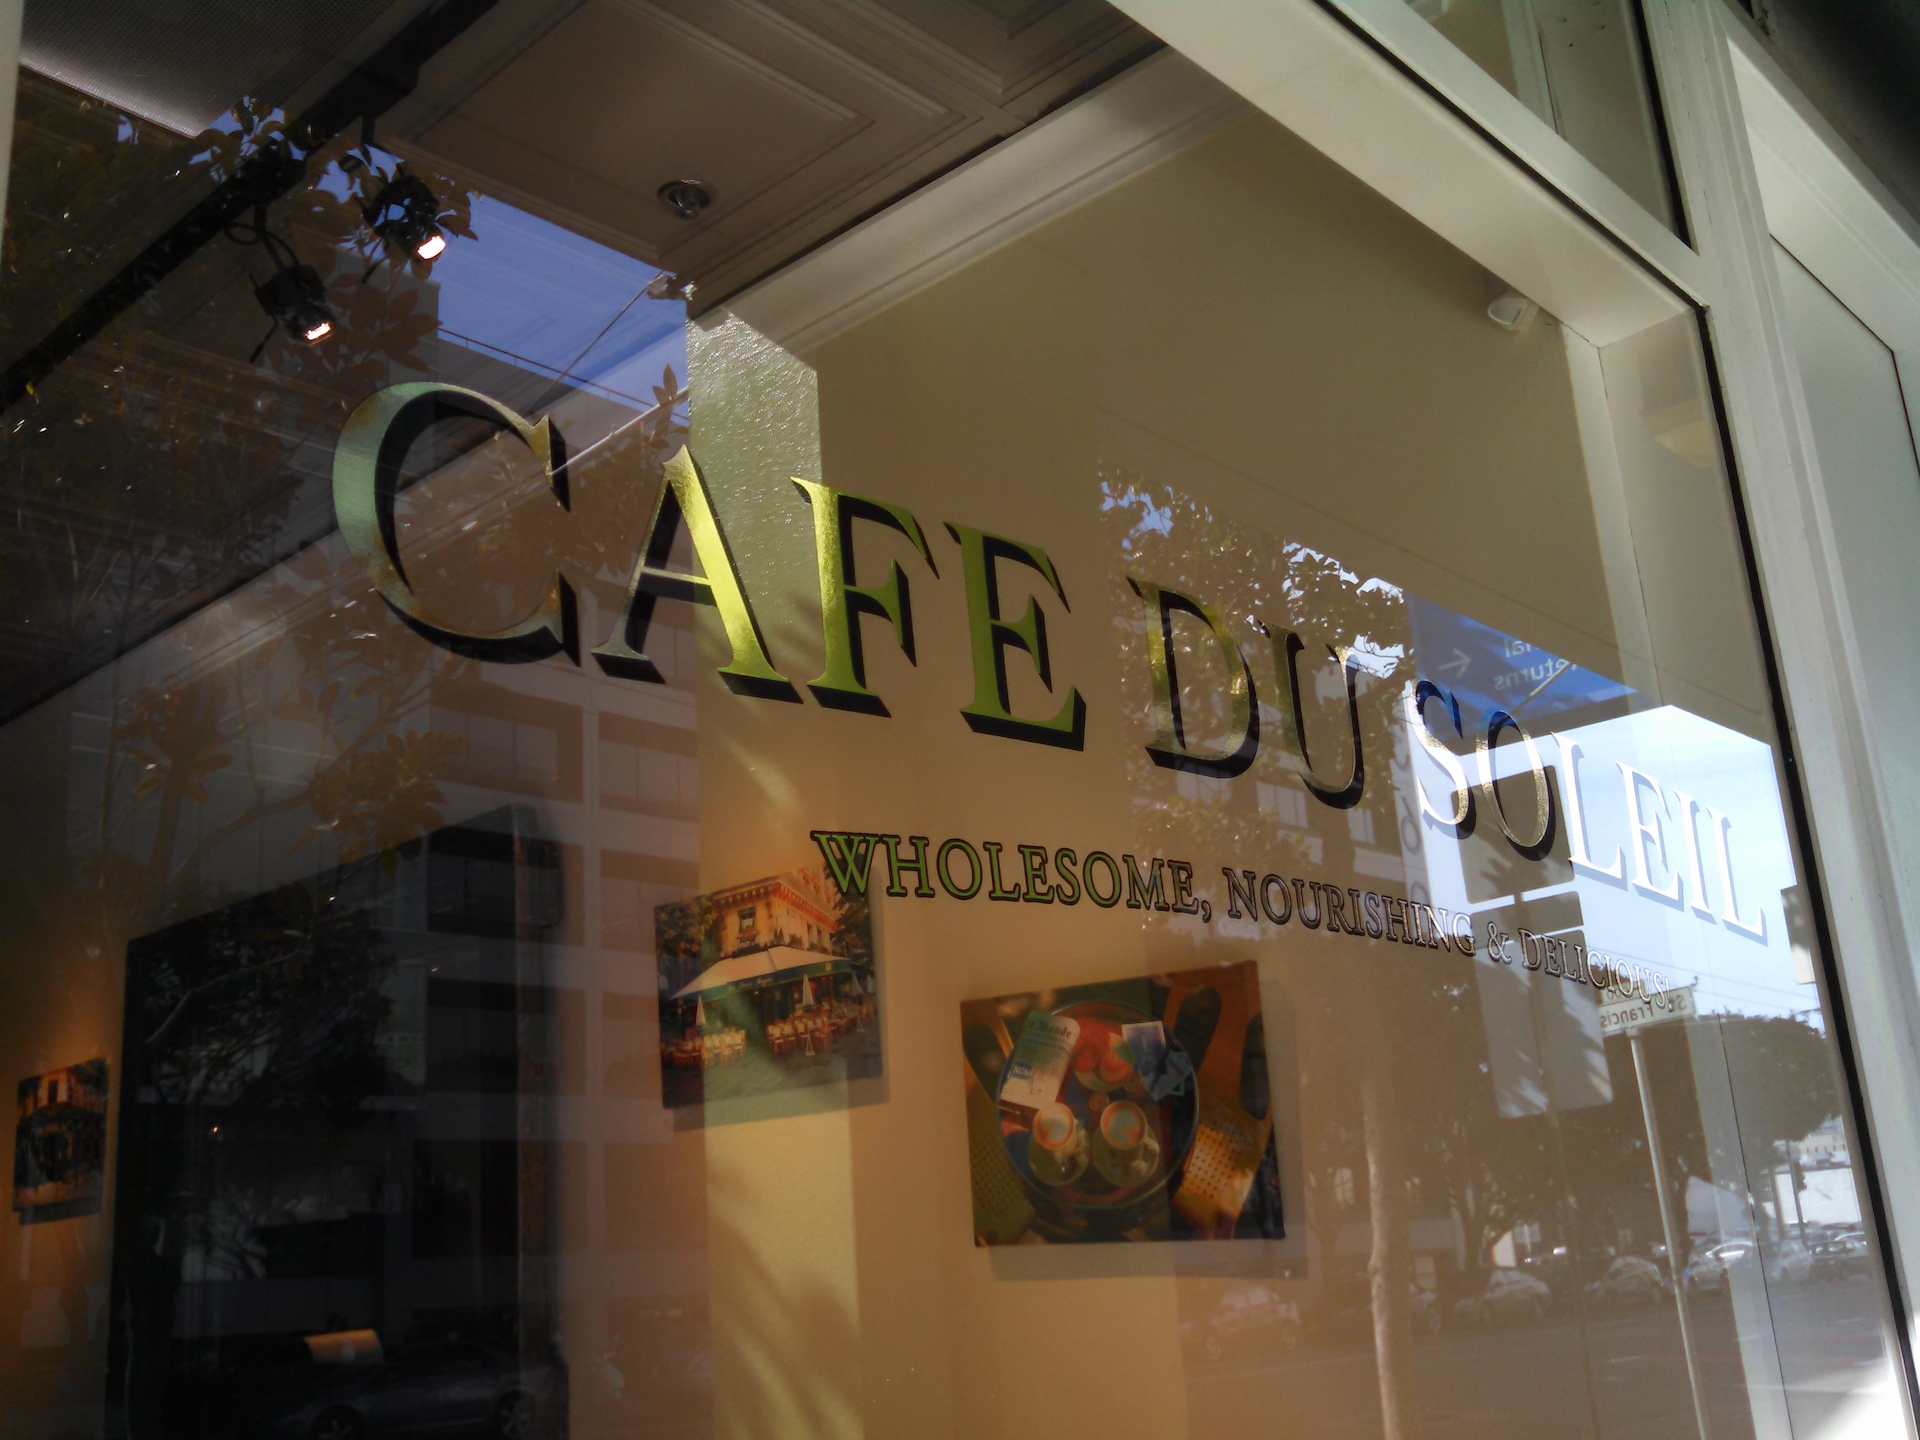 Cafe du Soleil is a small cafe